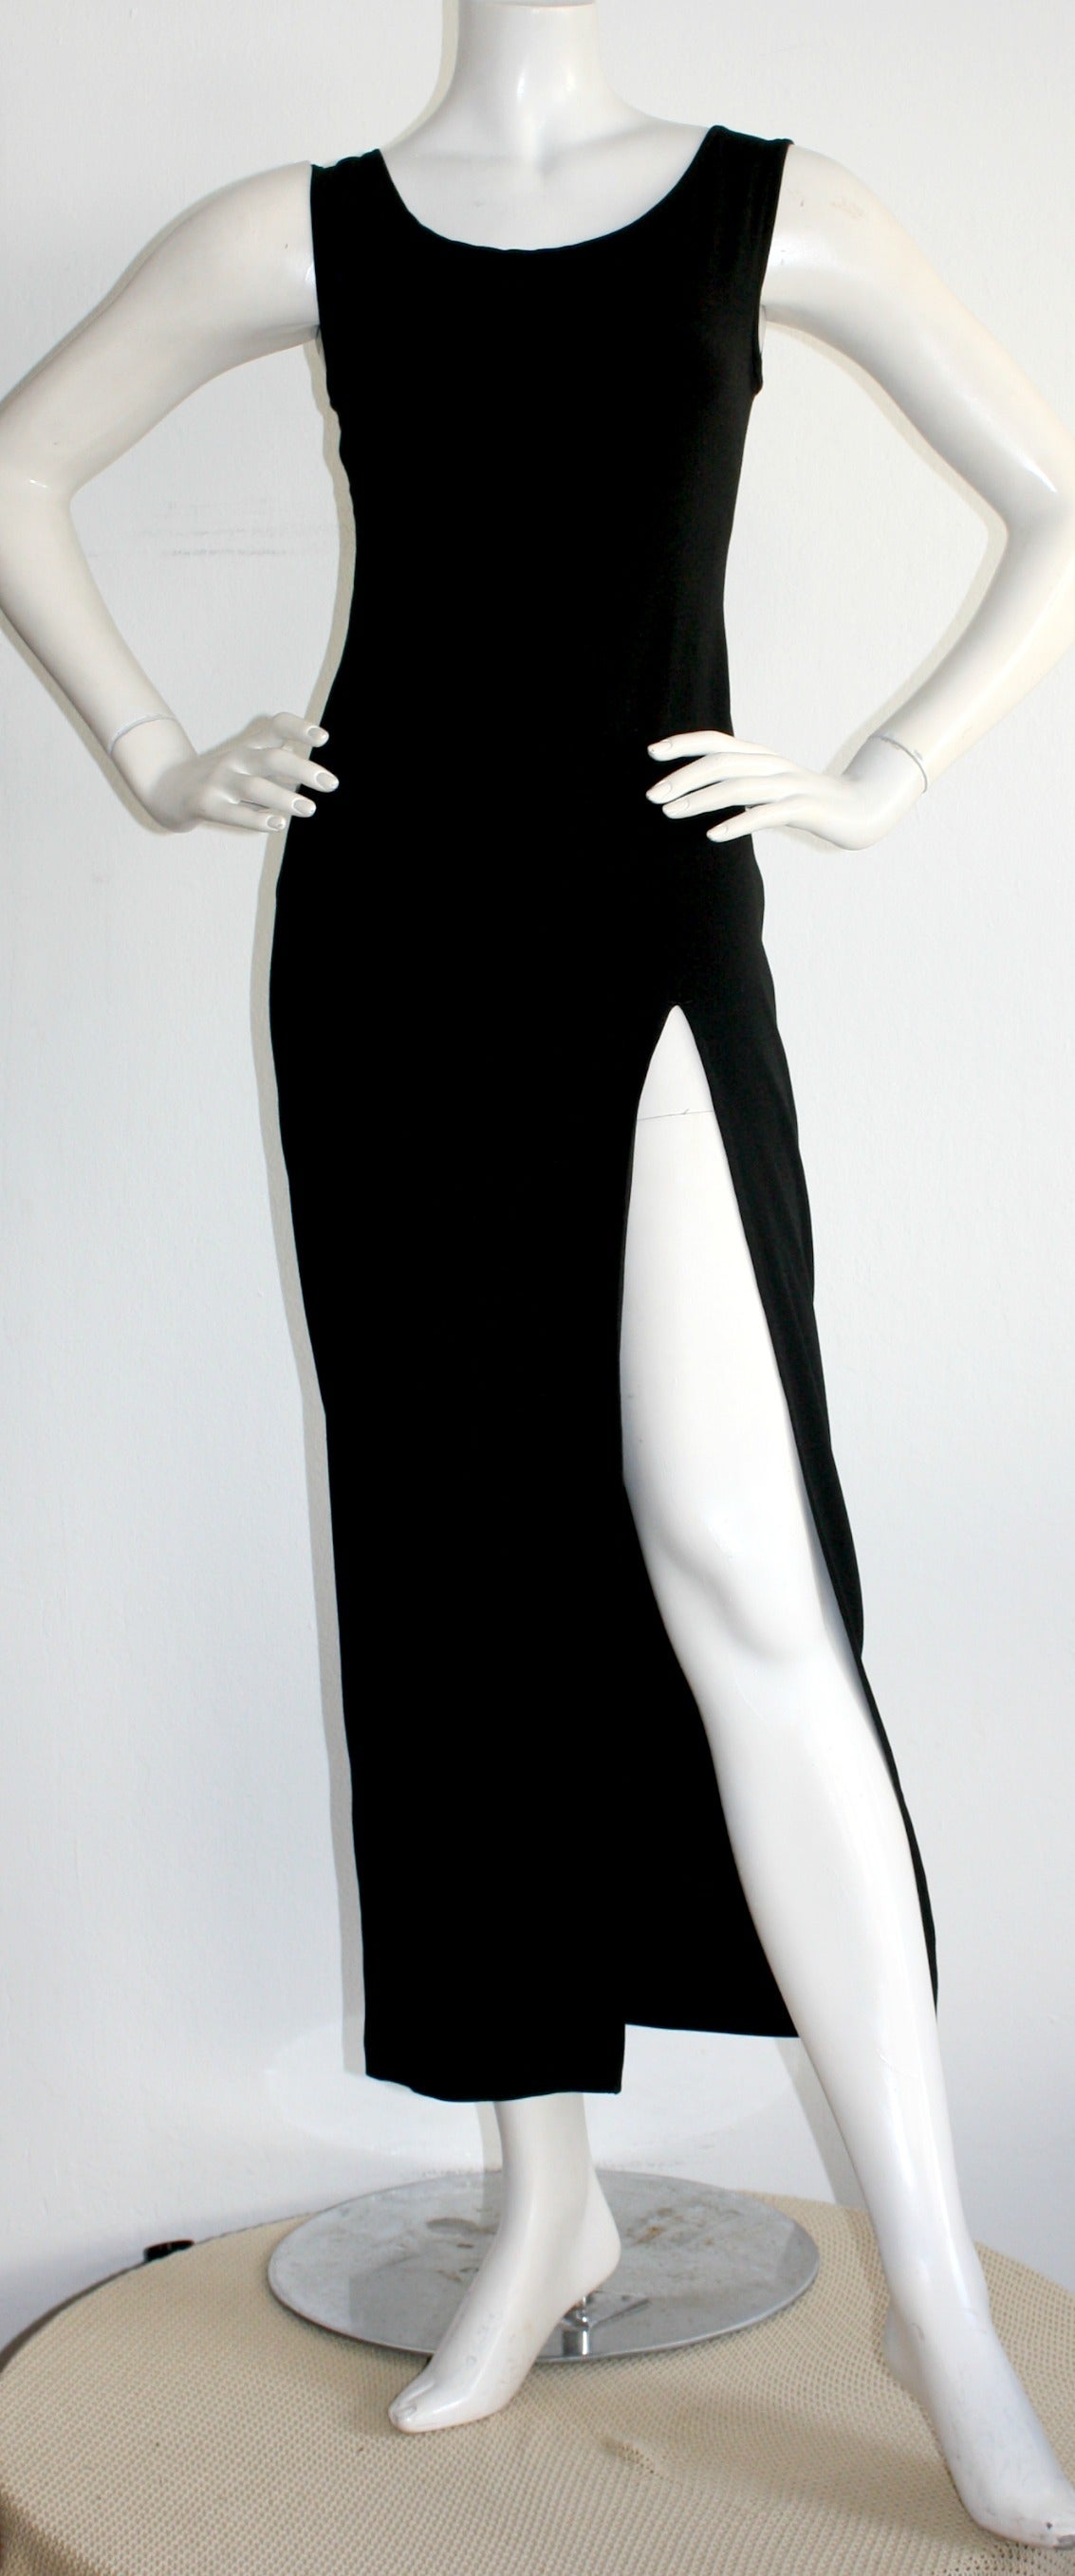 Sexy vintage Jean Paul Gaultier black dress! Who ever said black dresses have to be boring!?! This stunning number features a sexy stretch rayon blend material, that hugs the body in all the right places! Also looks great belted. Made in Italy. In